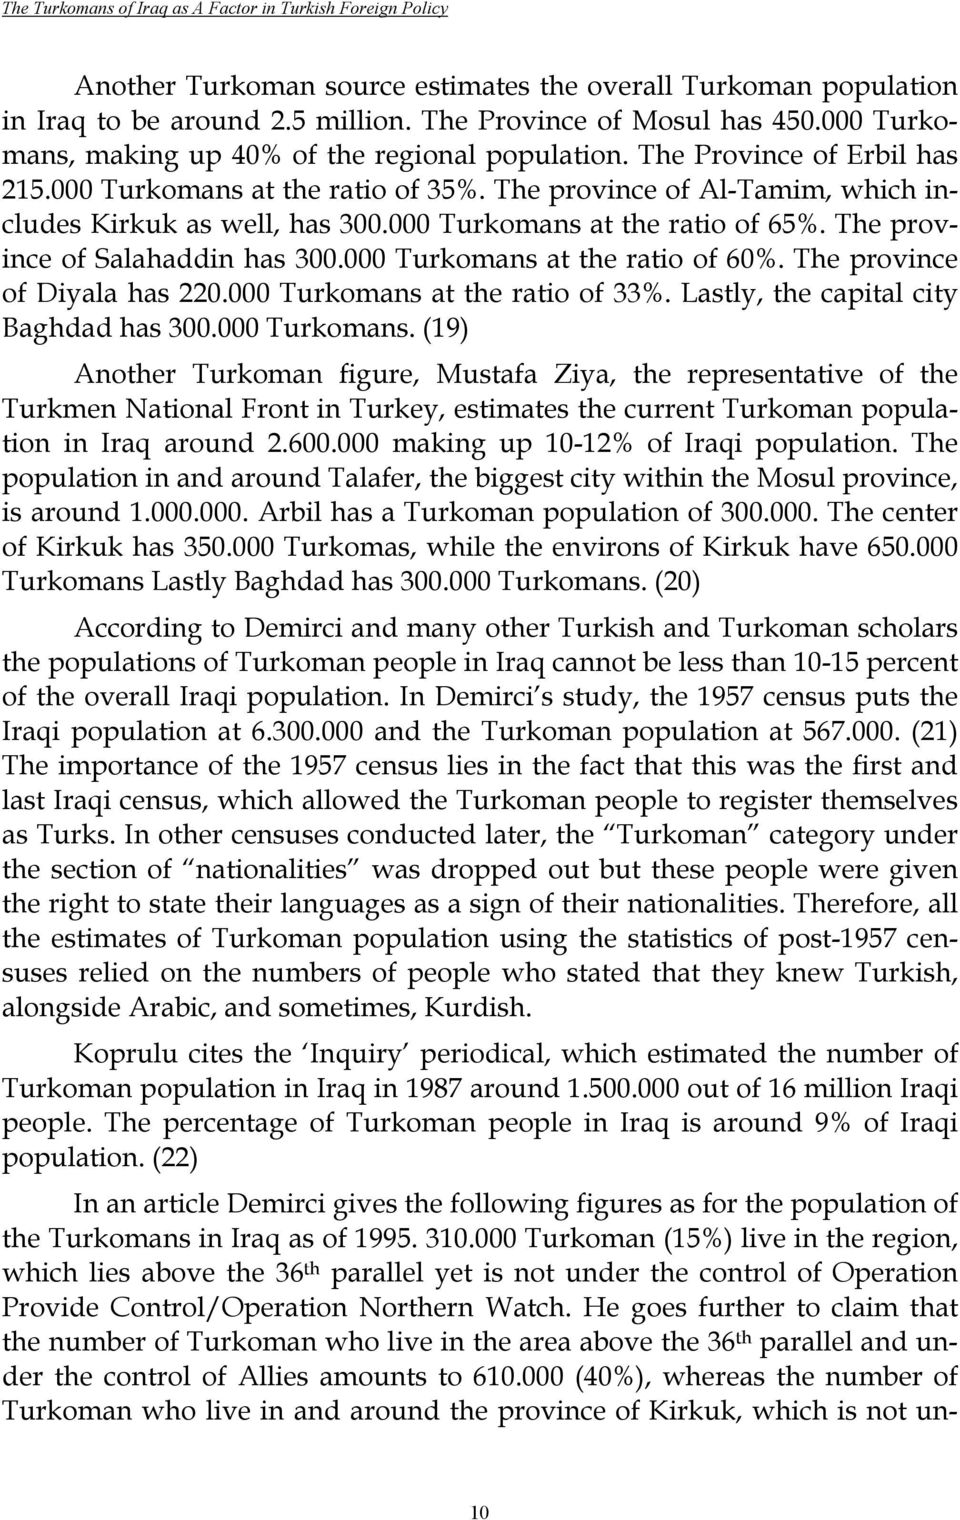 000 Turkomans at the ratio of 65%. The province of Salahaddin has 300.000 Turkomans at the ratio of 60%. The province of Diyala has 220.000 Turkomans at the ratio of 33%.